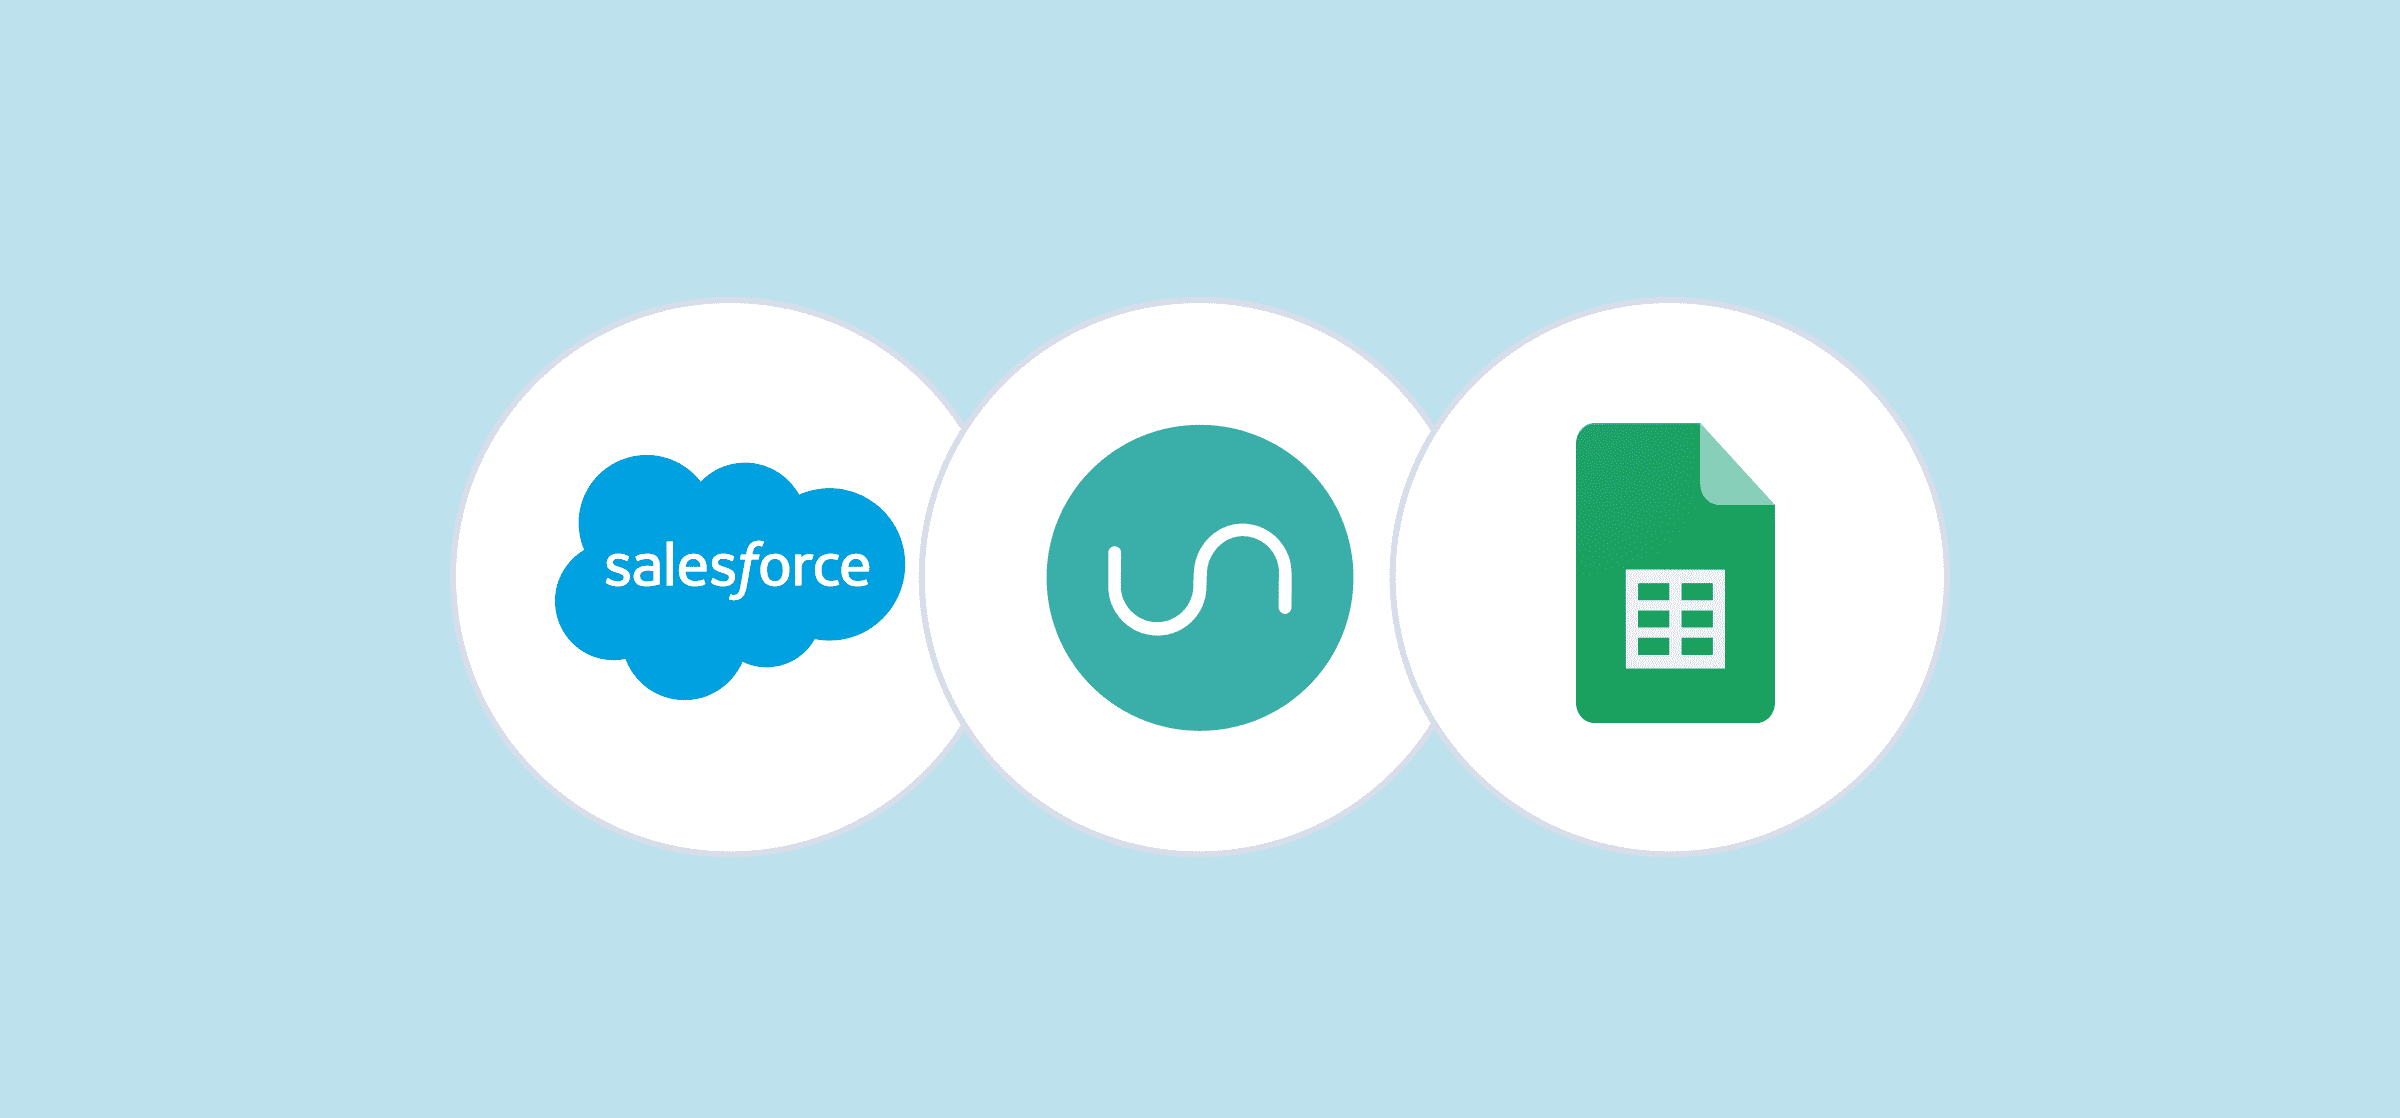 Logos for Salesforce and Google Sheets, representing a template used to sync data between them with Unito.